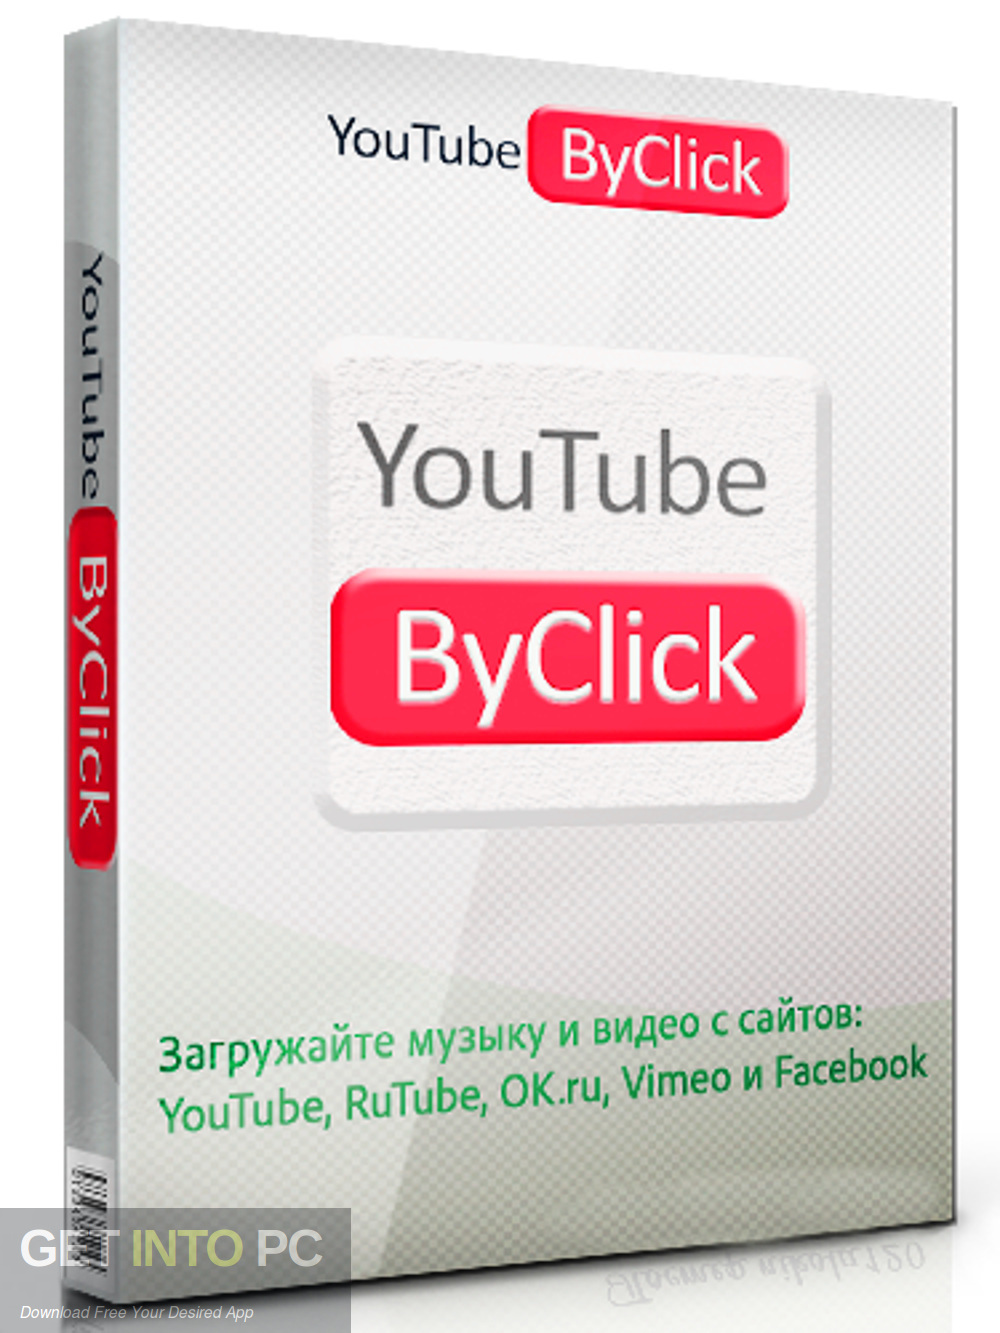 YouTube By Click Premium 2019 Free Download-GetintoPC.com